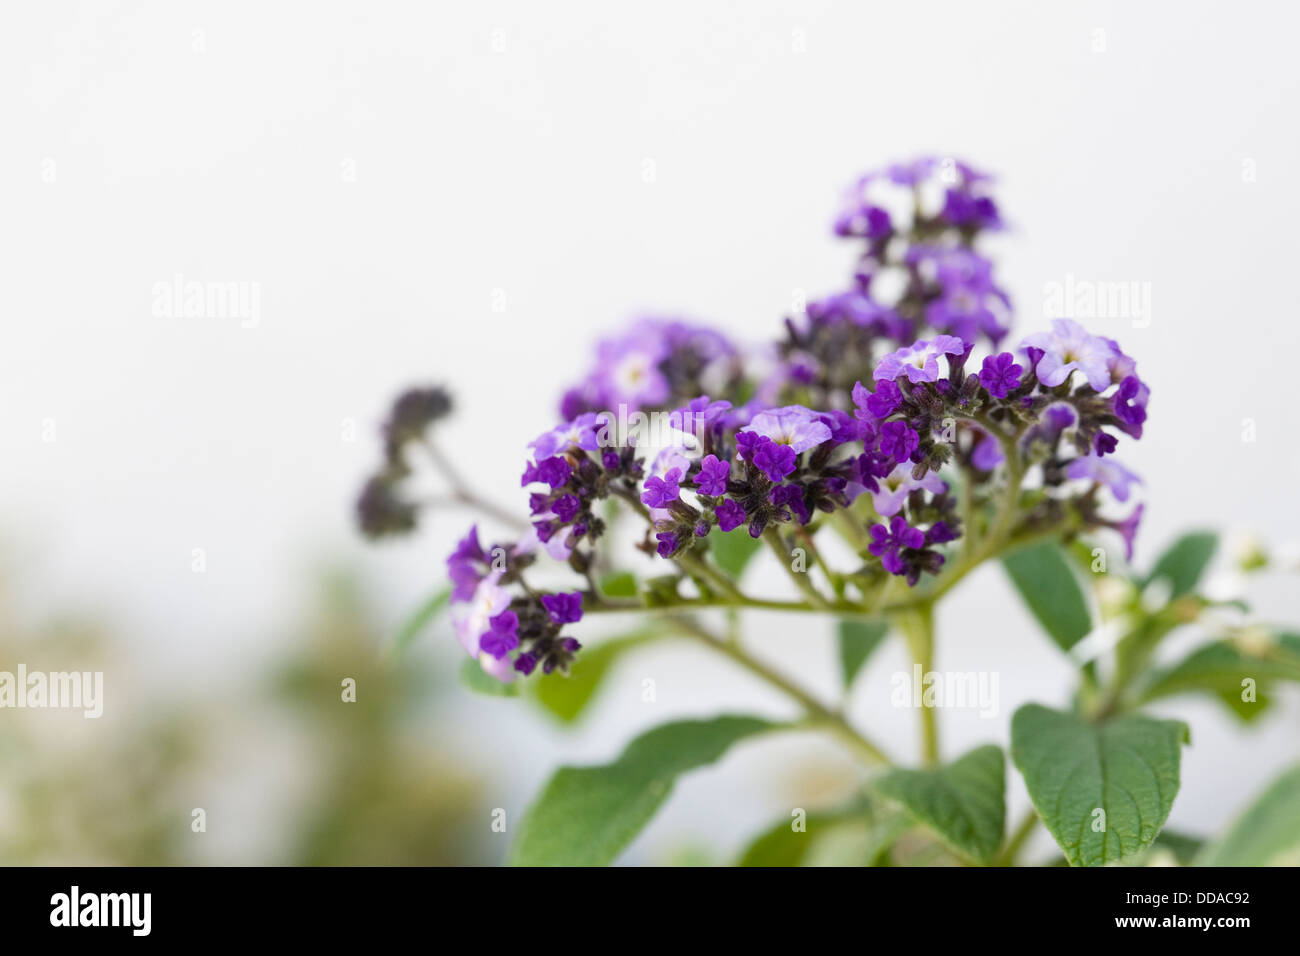 Heliotropium in a summer courtyard garden. Heliotrope flowers growing against a white wall. Stock Photo